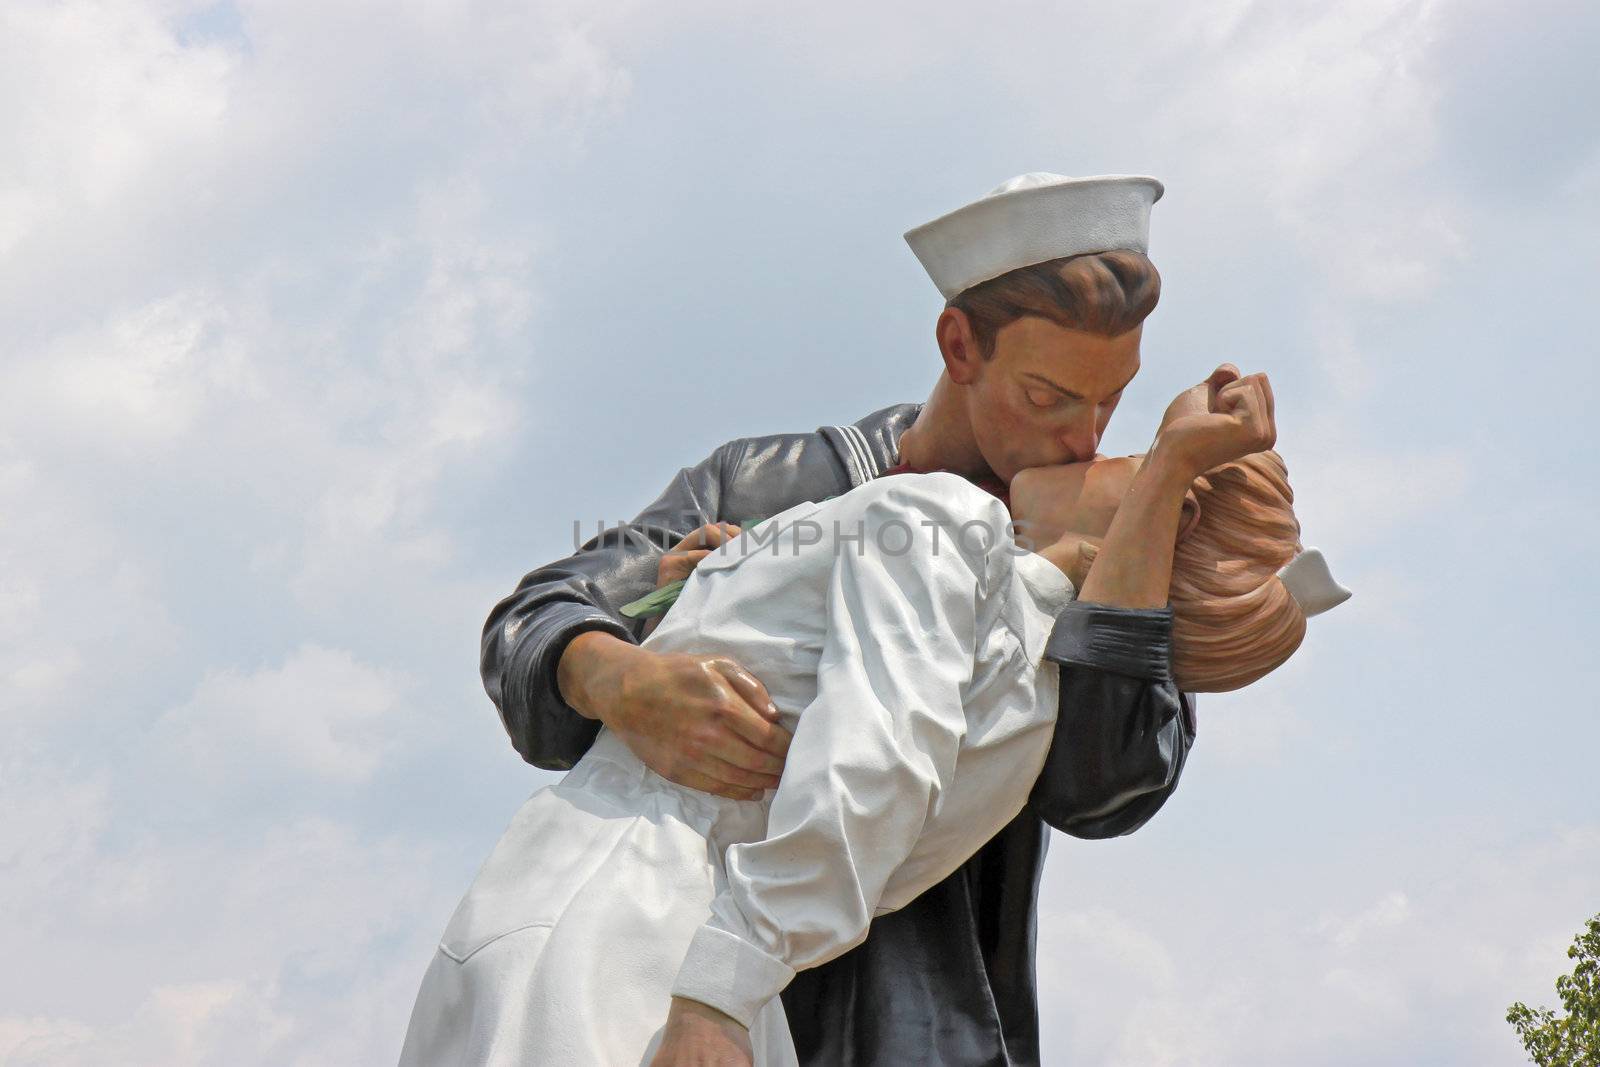 Unconditional Surrender statue in Sarasota, Florida, before it w by sgoodwin4813